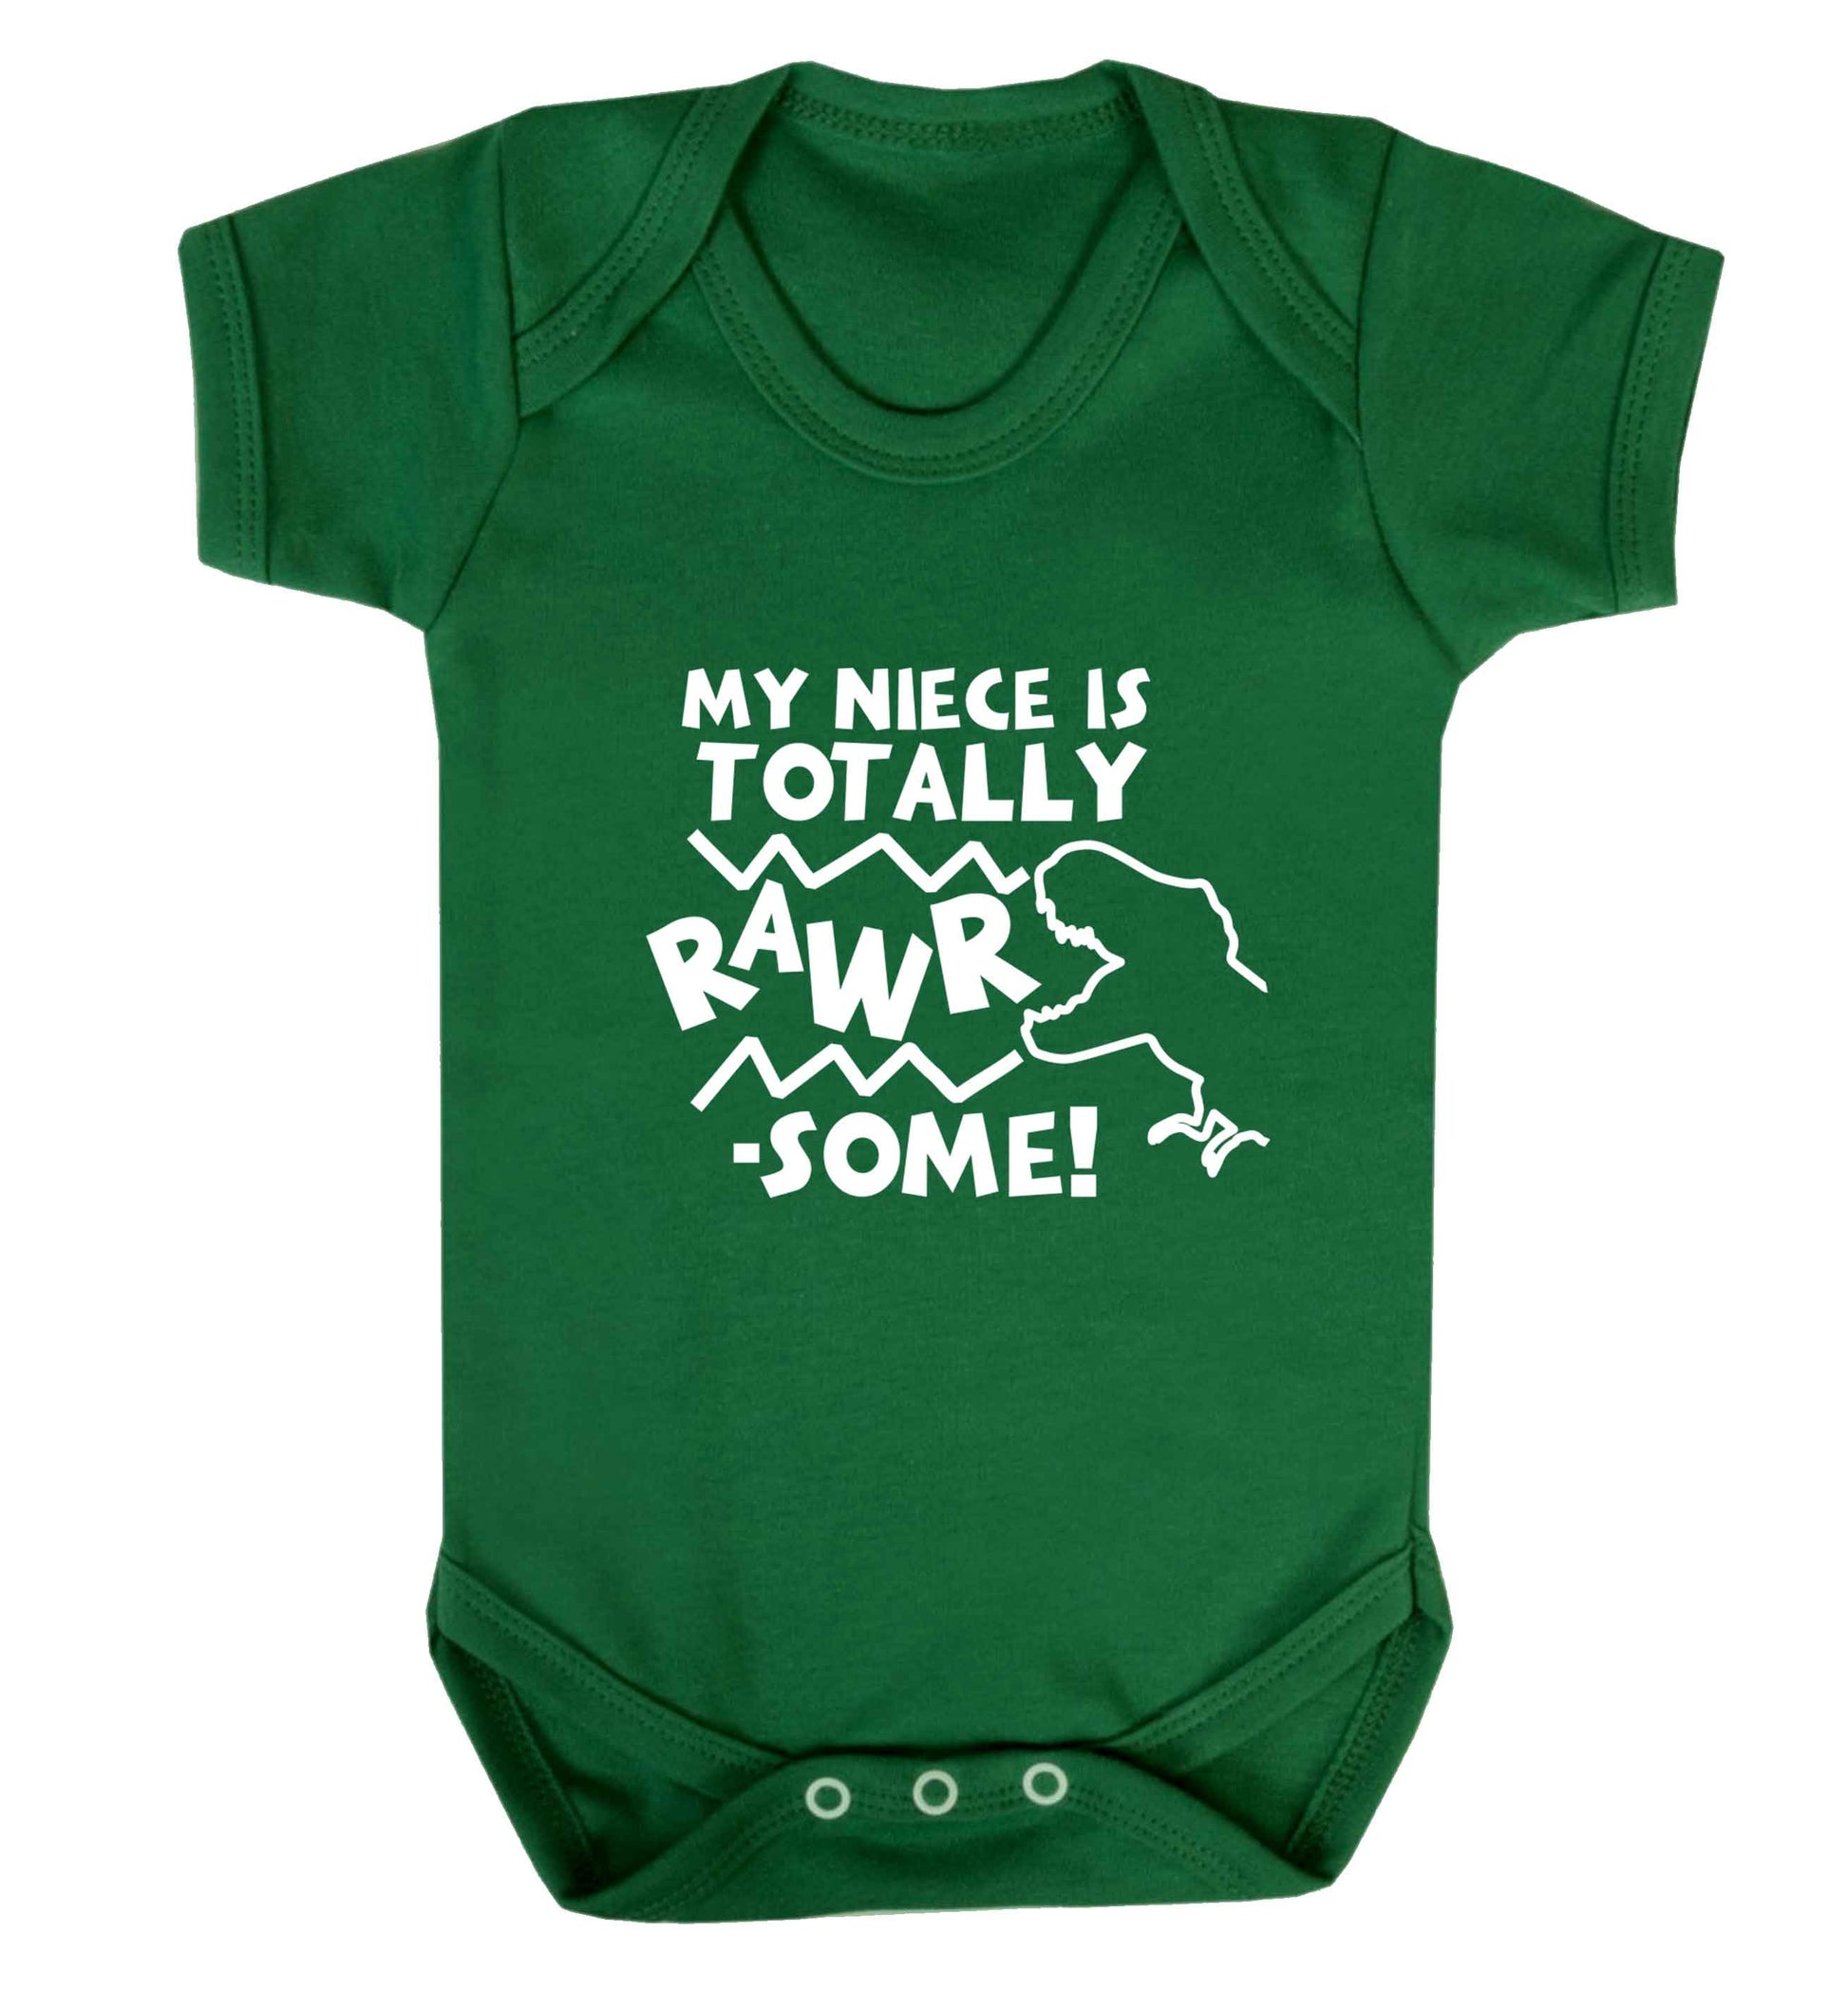 My niece is totally rawrsome baby vest green 18-24 months